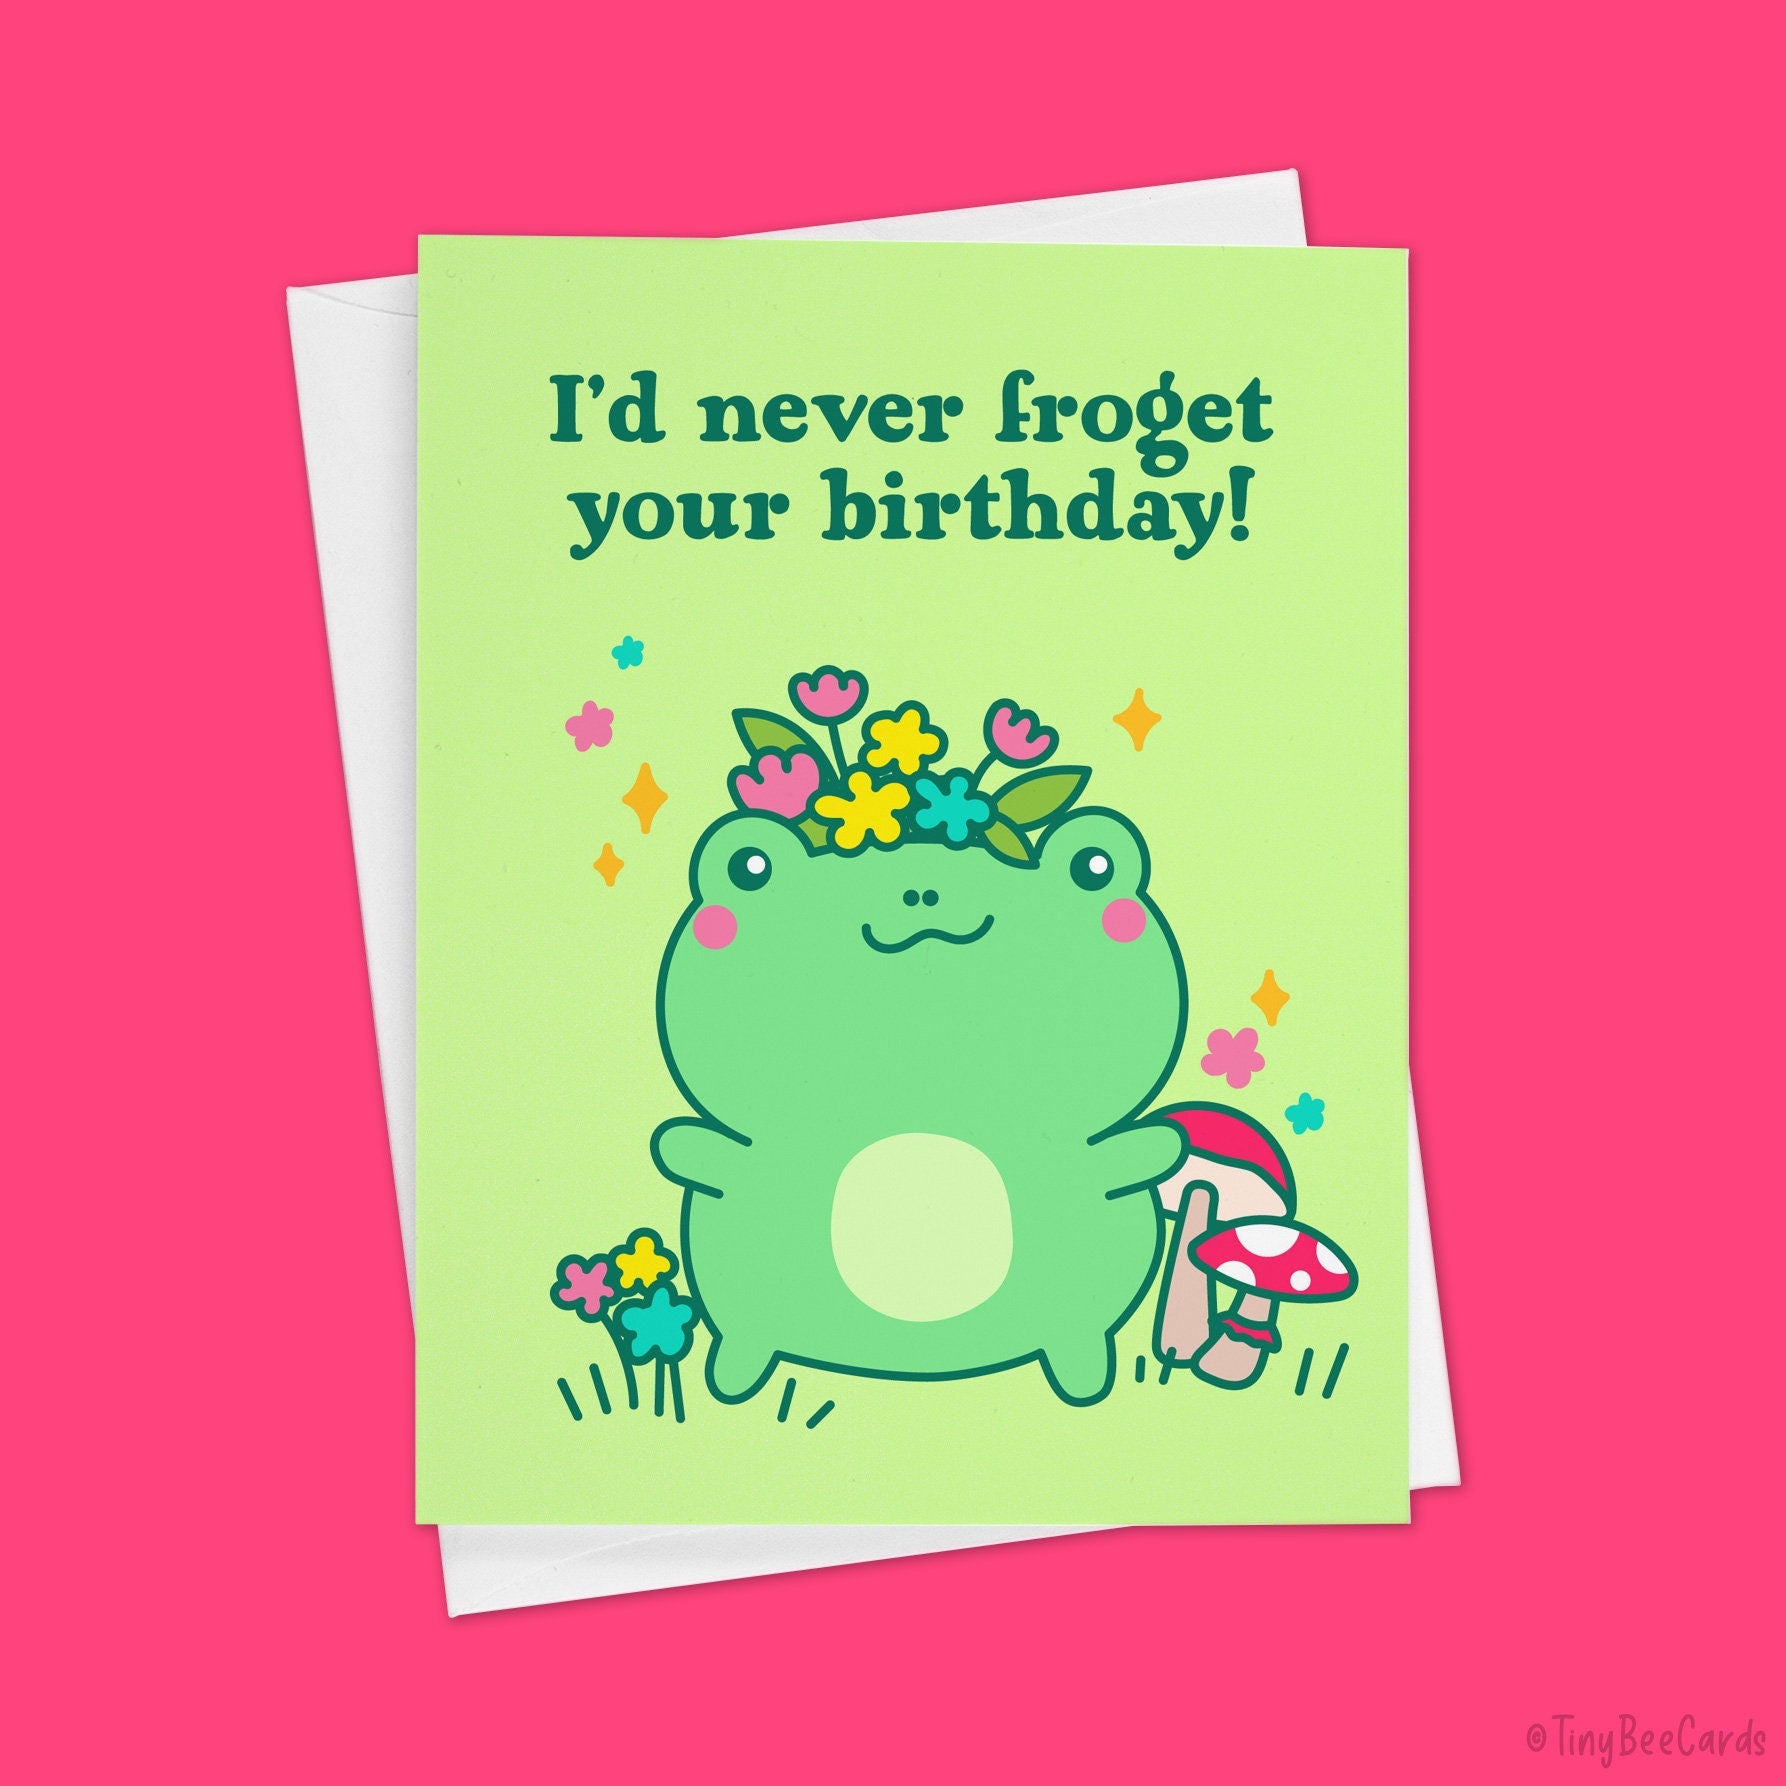 Frog Birthday Card "Never Froget Your Birthday" - funny birthday card, toad pun, cute birthday card for friend, cottagecore, fantasy forest